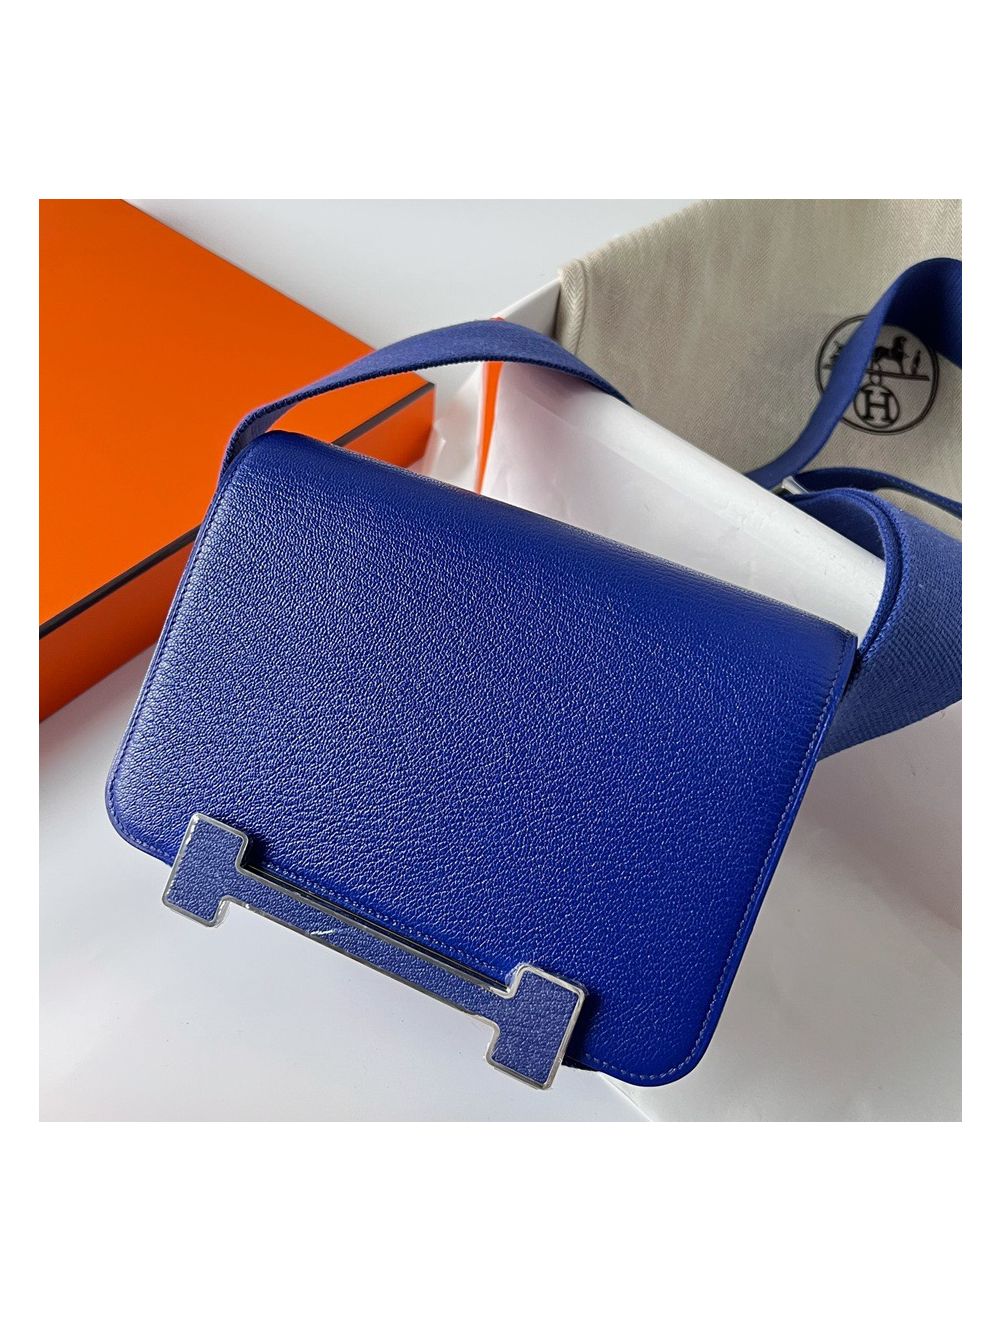 Hermes Chevre Mysore In-The-Loop-To-Go Pouch